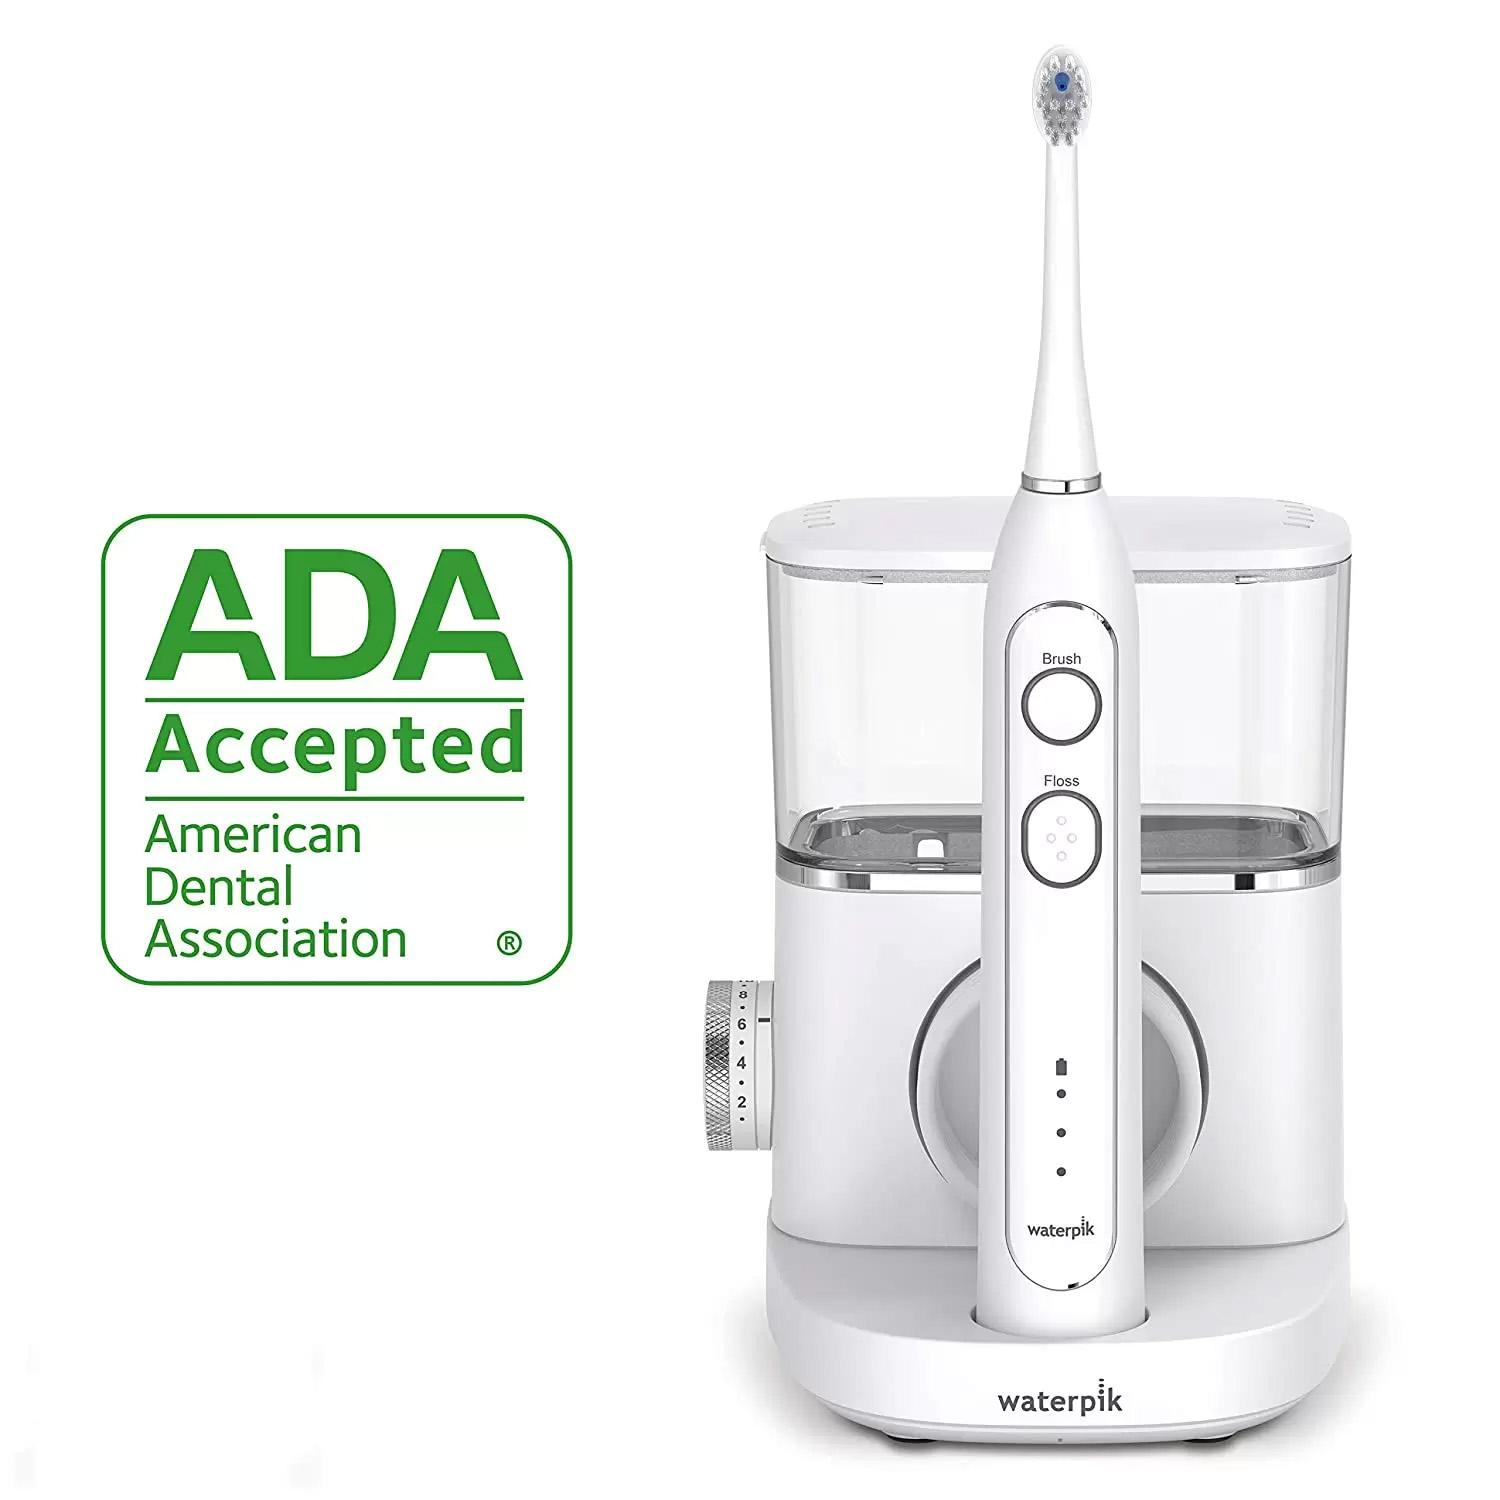 Waterpik Sonic-Fusion Professional Flossing Toothbrush for $116 Shipped